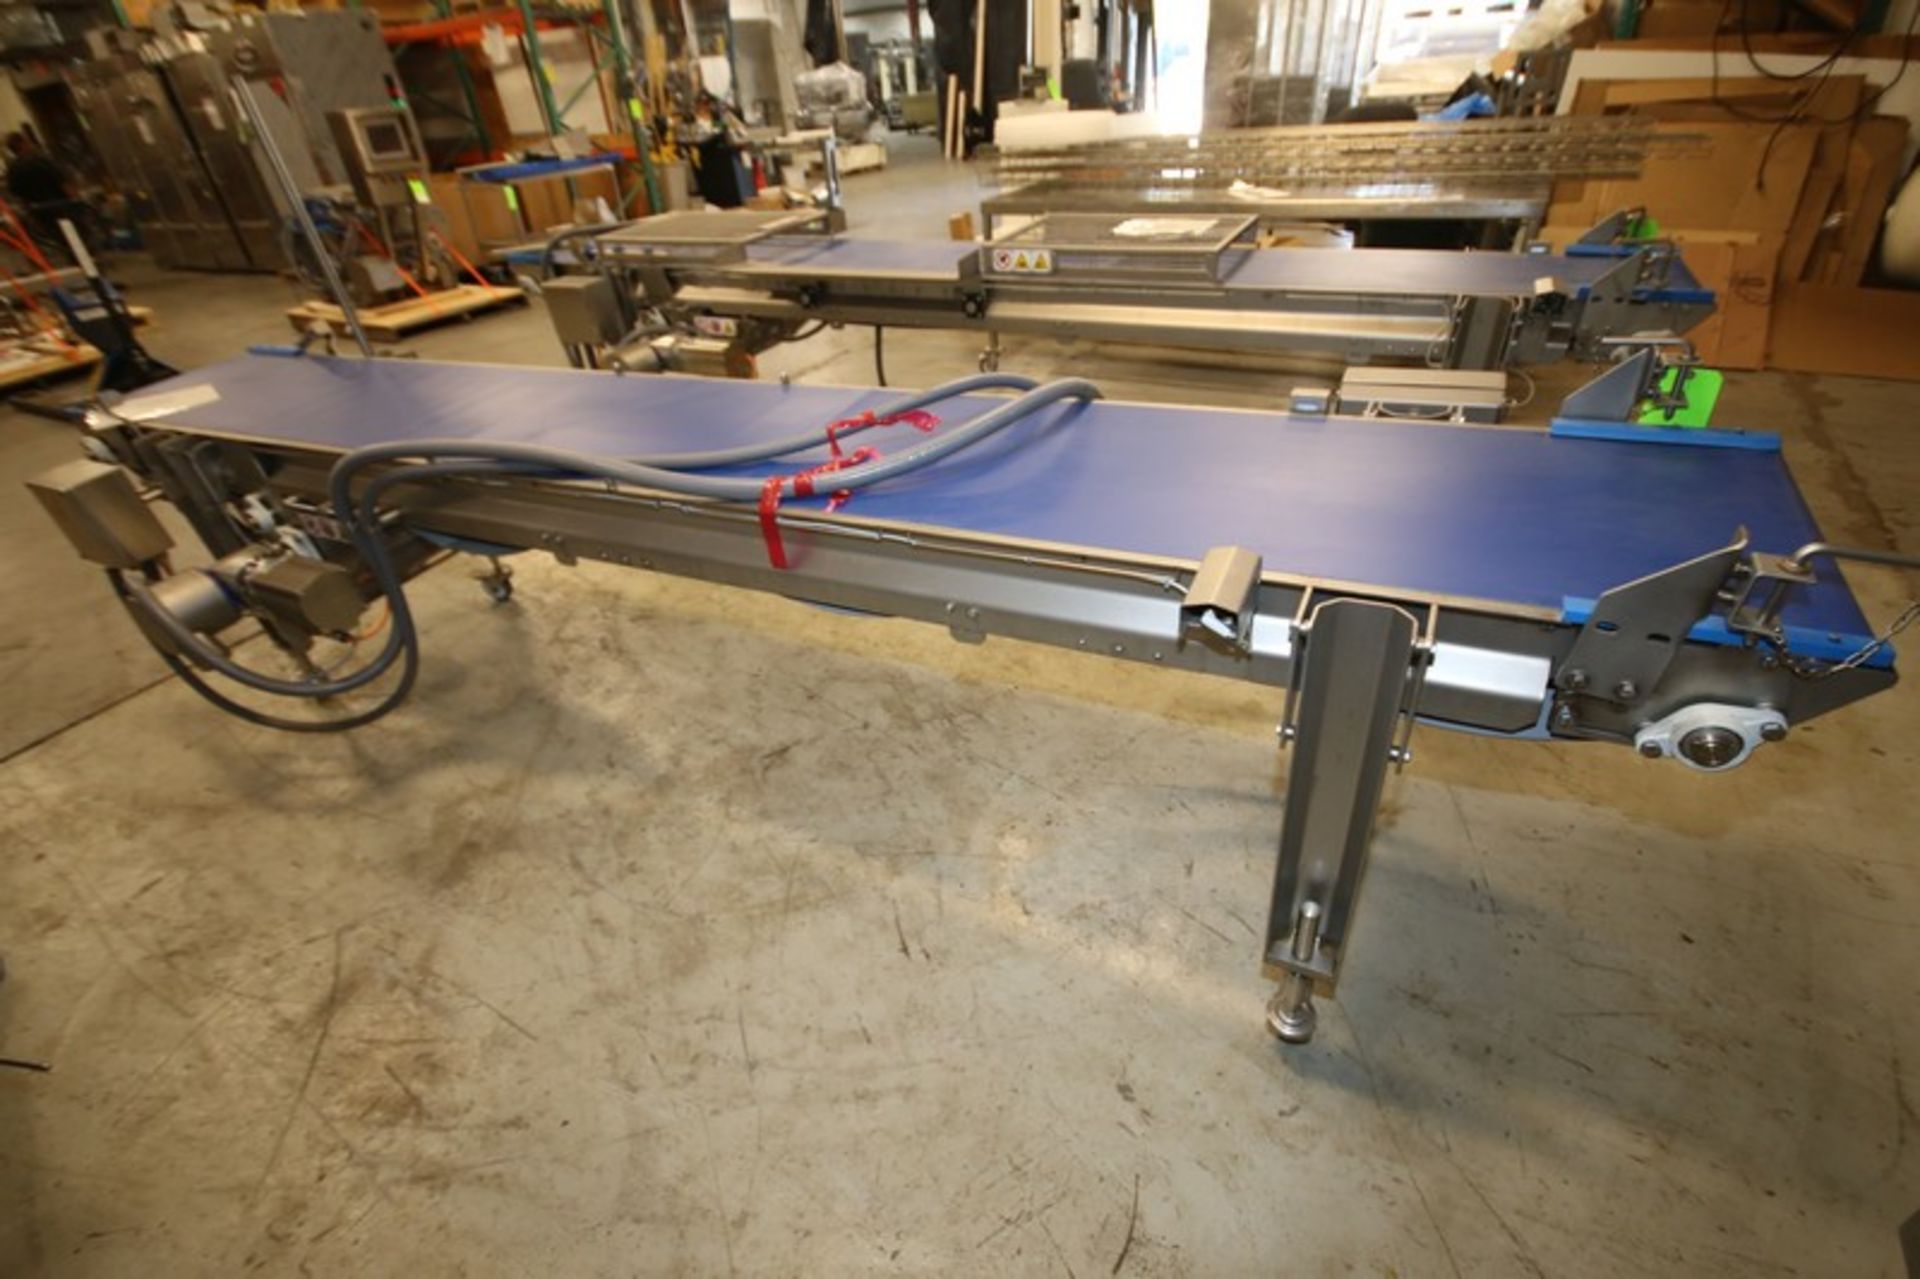 2019 Alimec Aprox. 149" L x 19.5" W x 33" H S/S Belt Conveyor, SN 813-59, with Bauer S/S Drive Motor - Image 4 of 4